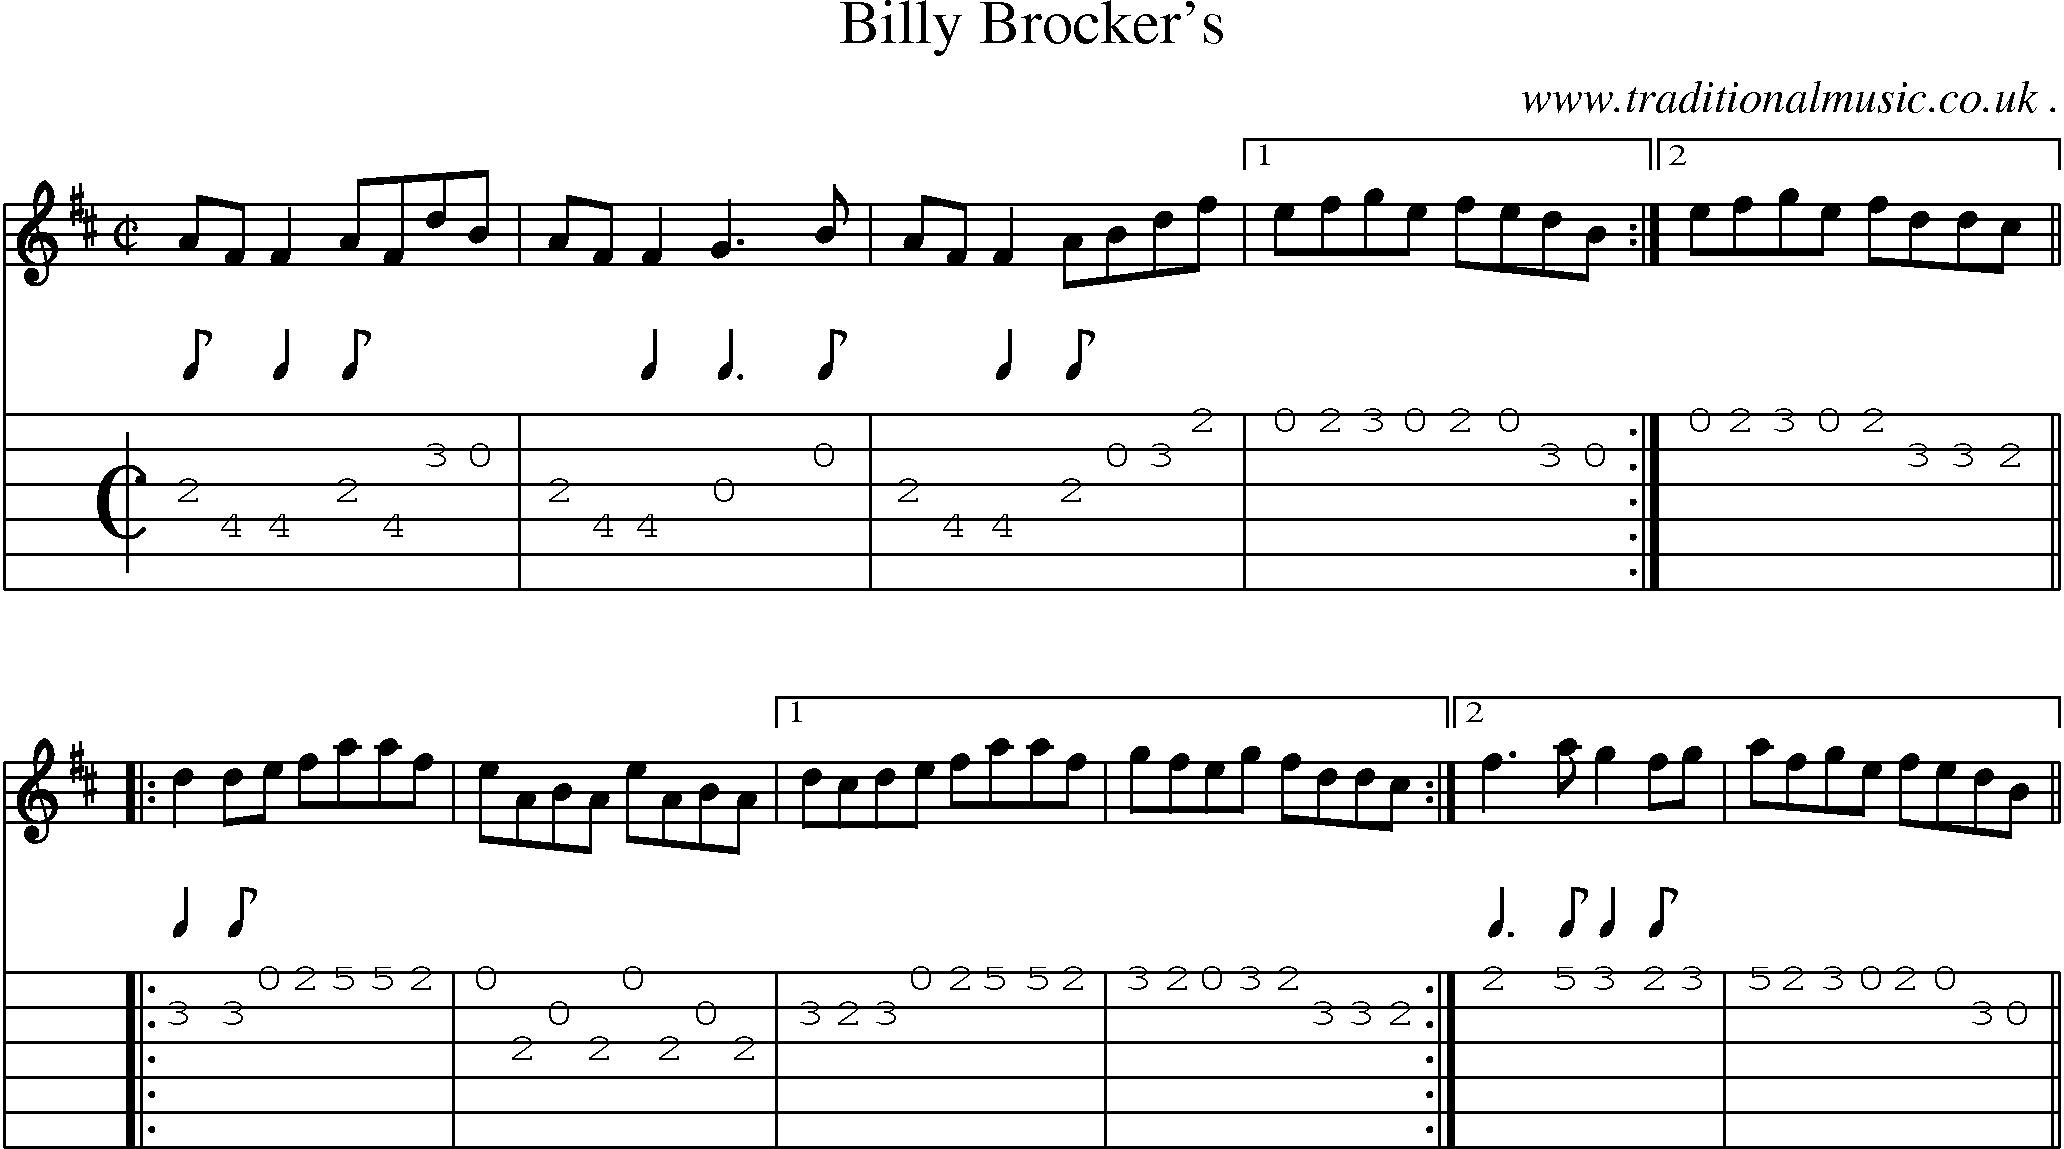 Sheet-Music and Guitar Tabs for Billy Brockers